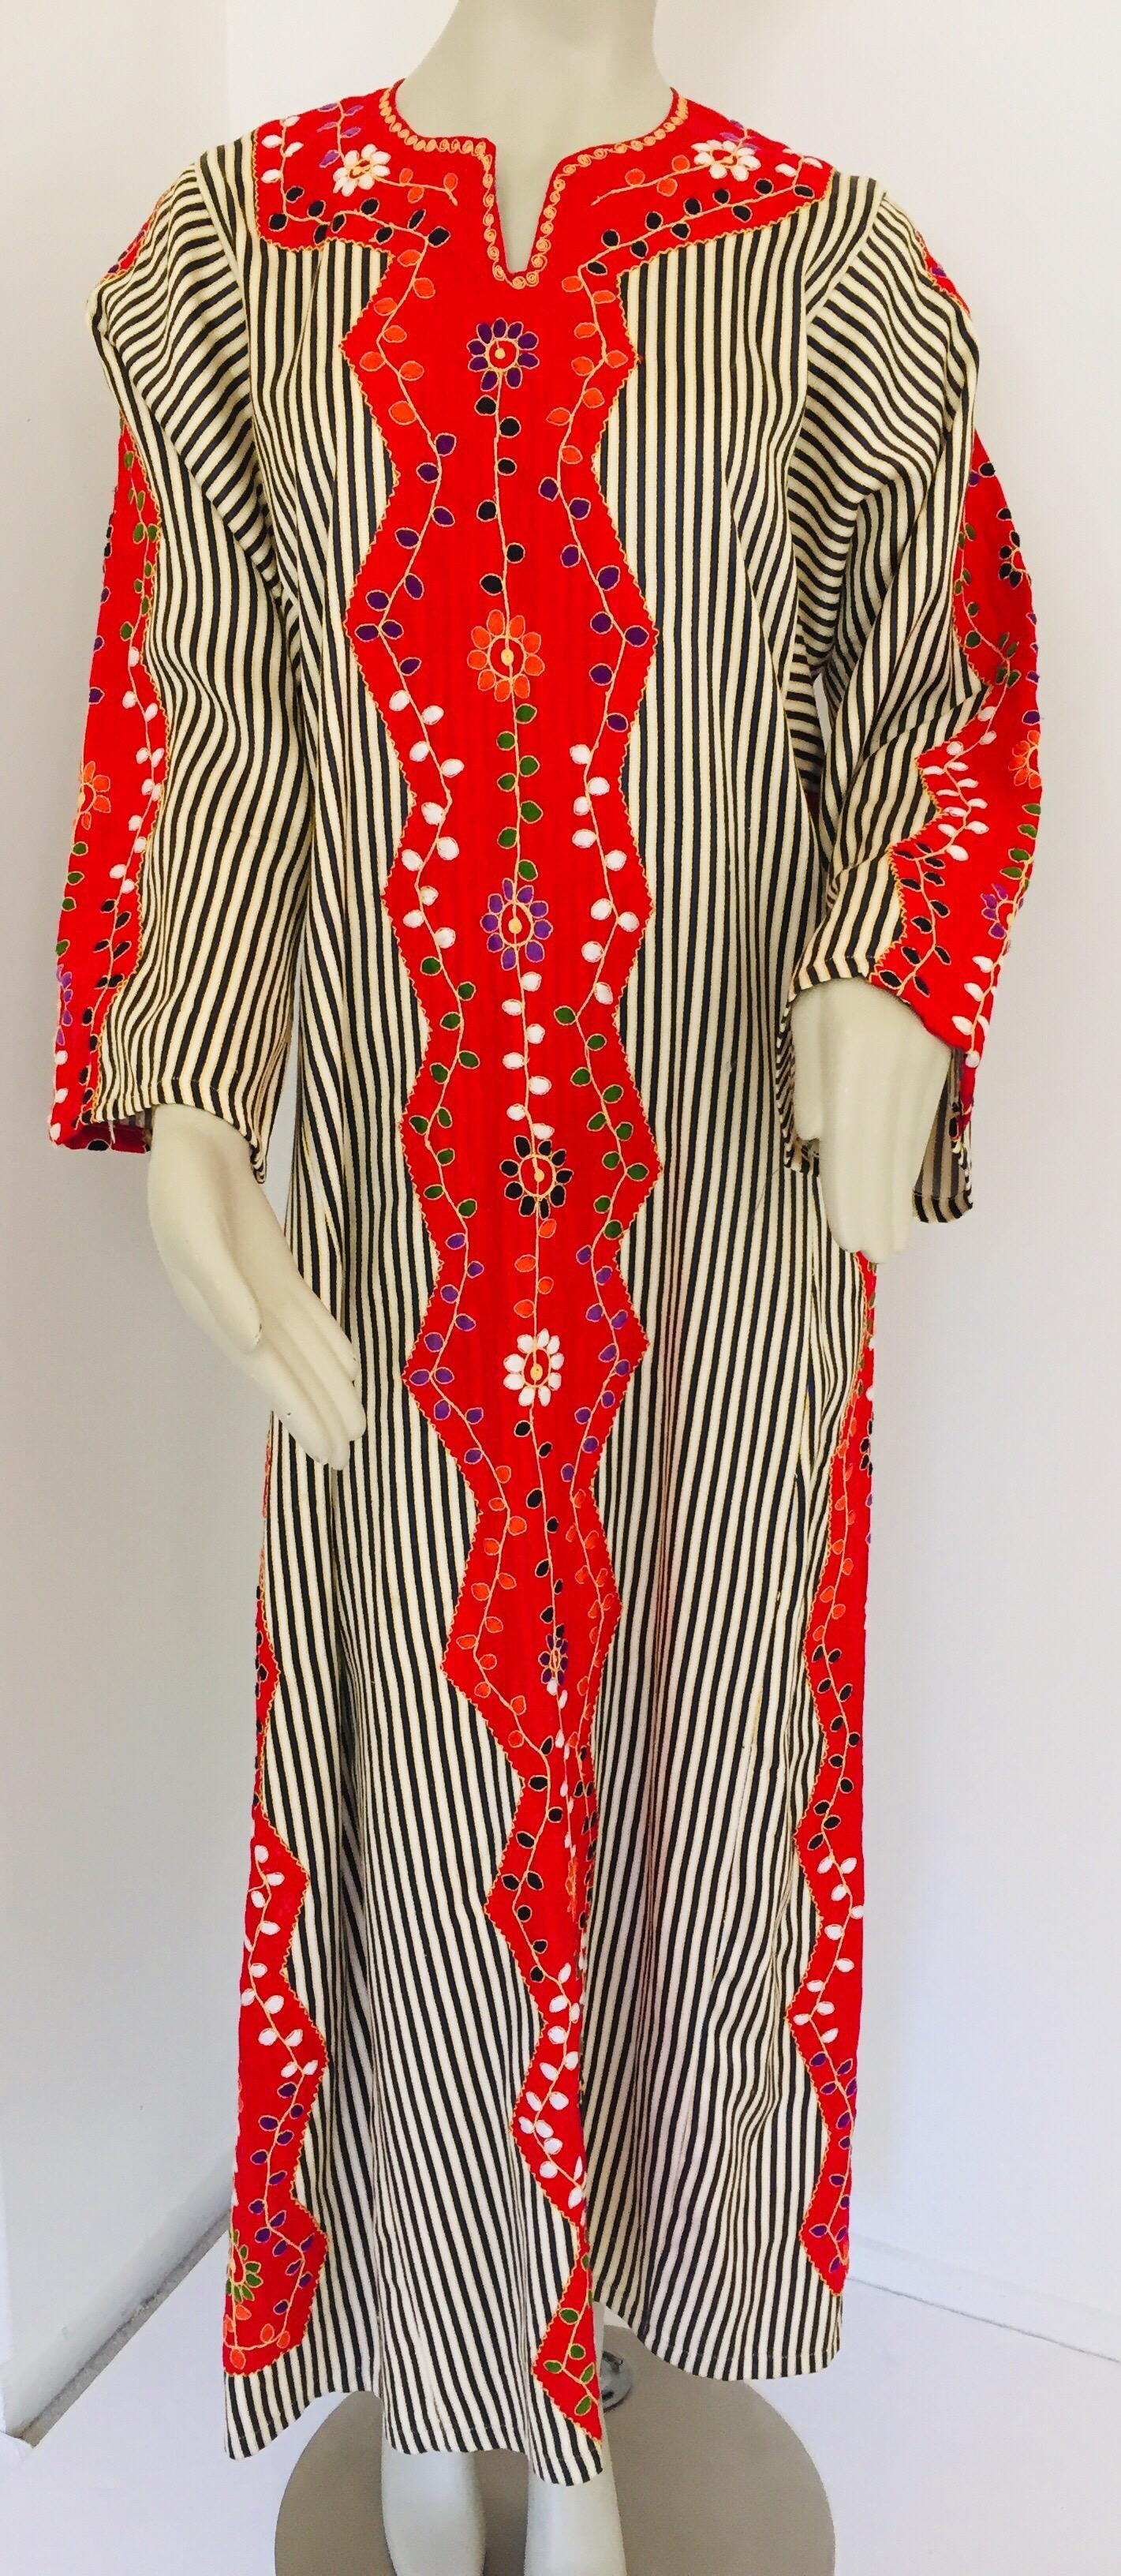 Vintage Middle Eastern Ethnic Caftan, Kaftan Maxi Dress In Good Condition For Sale In North Hollywood, CA